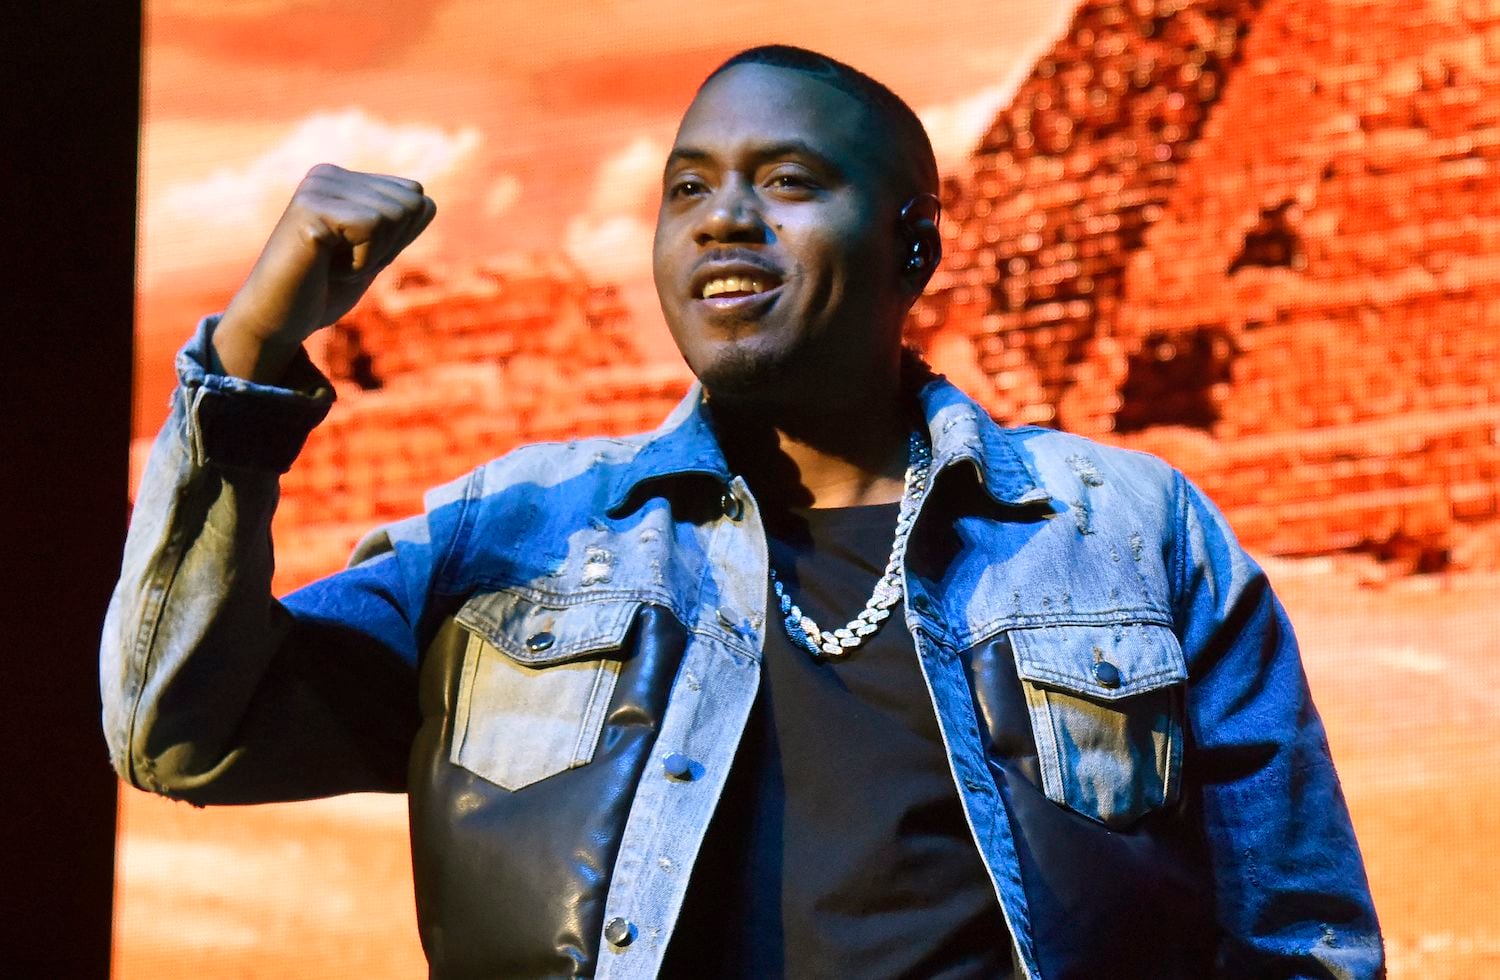 Nas performs in Oakland, Calif., Feb. 21, 2020.